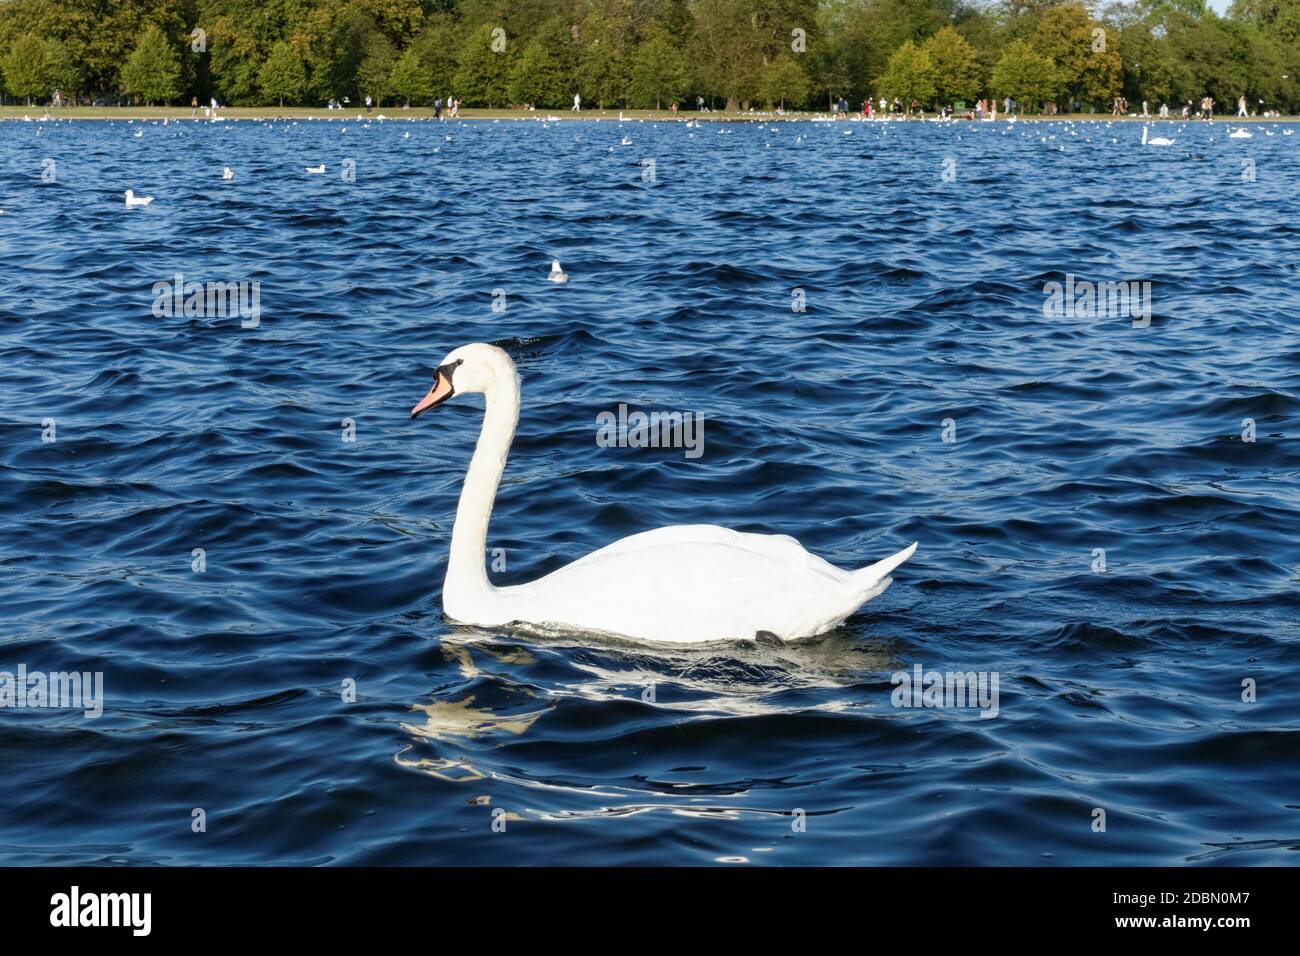 Mute swan swimming on a pond in in Kensington Gardens, London England United Kingdom UK Stock Photo